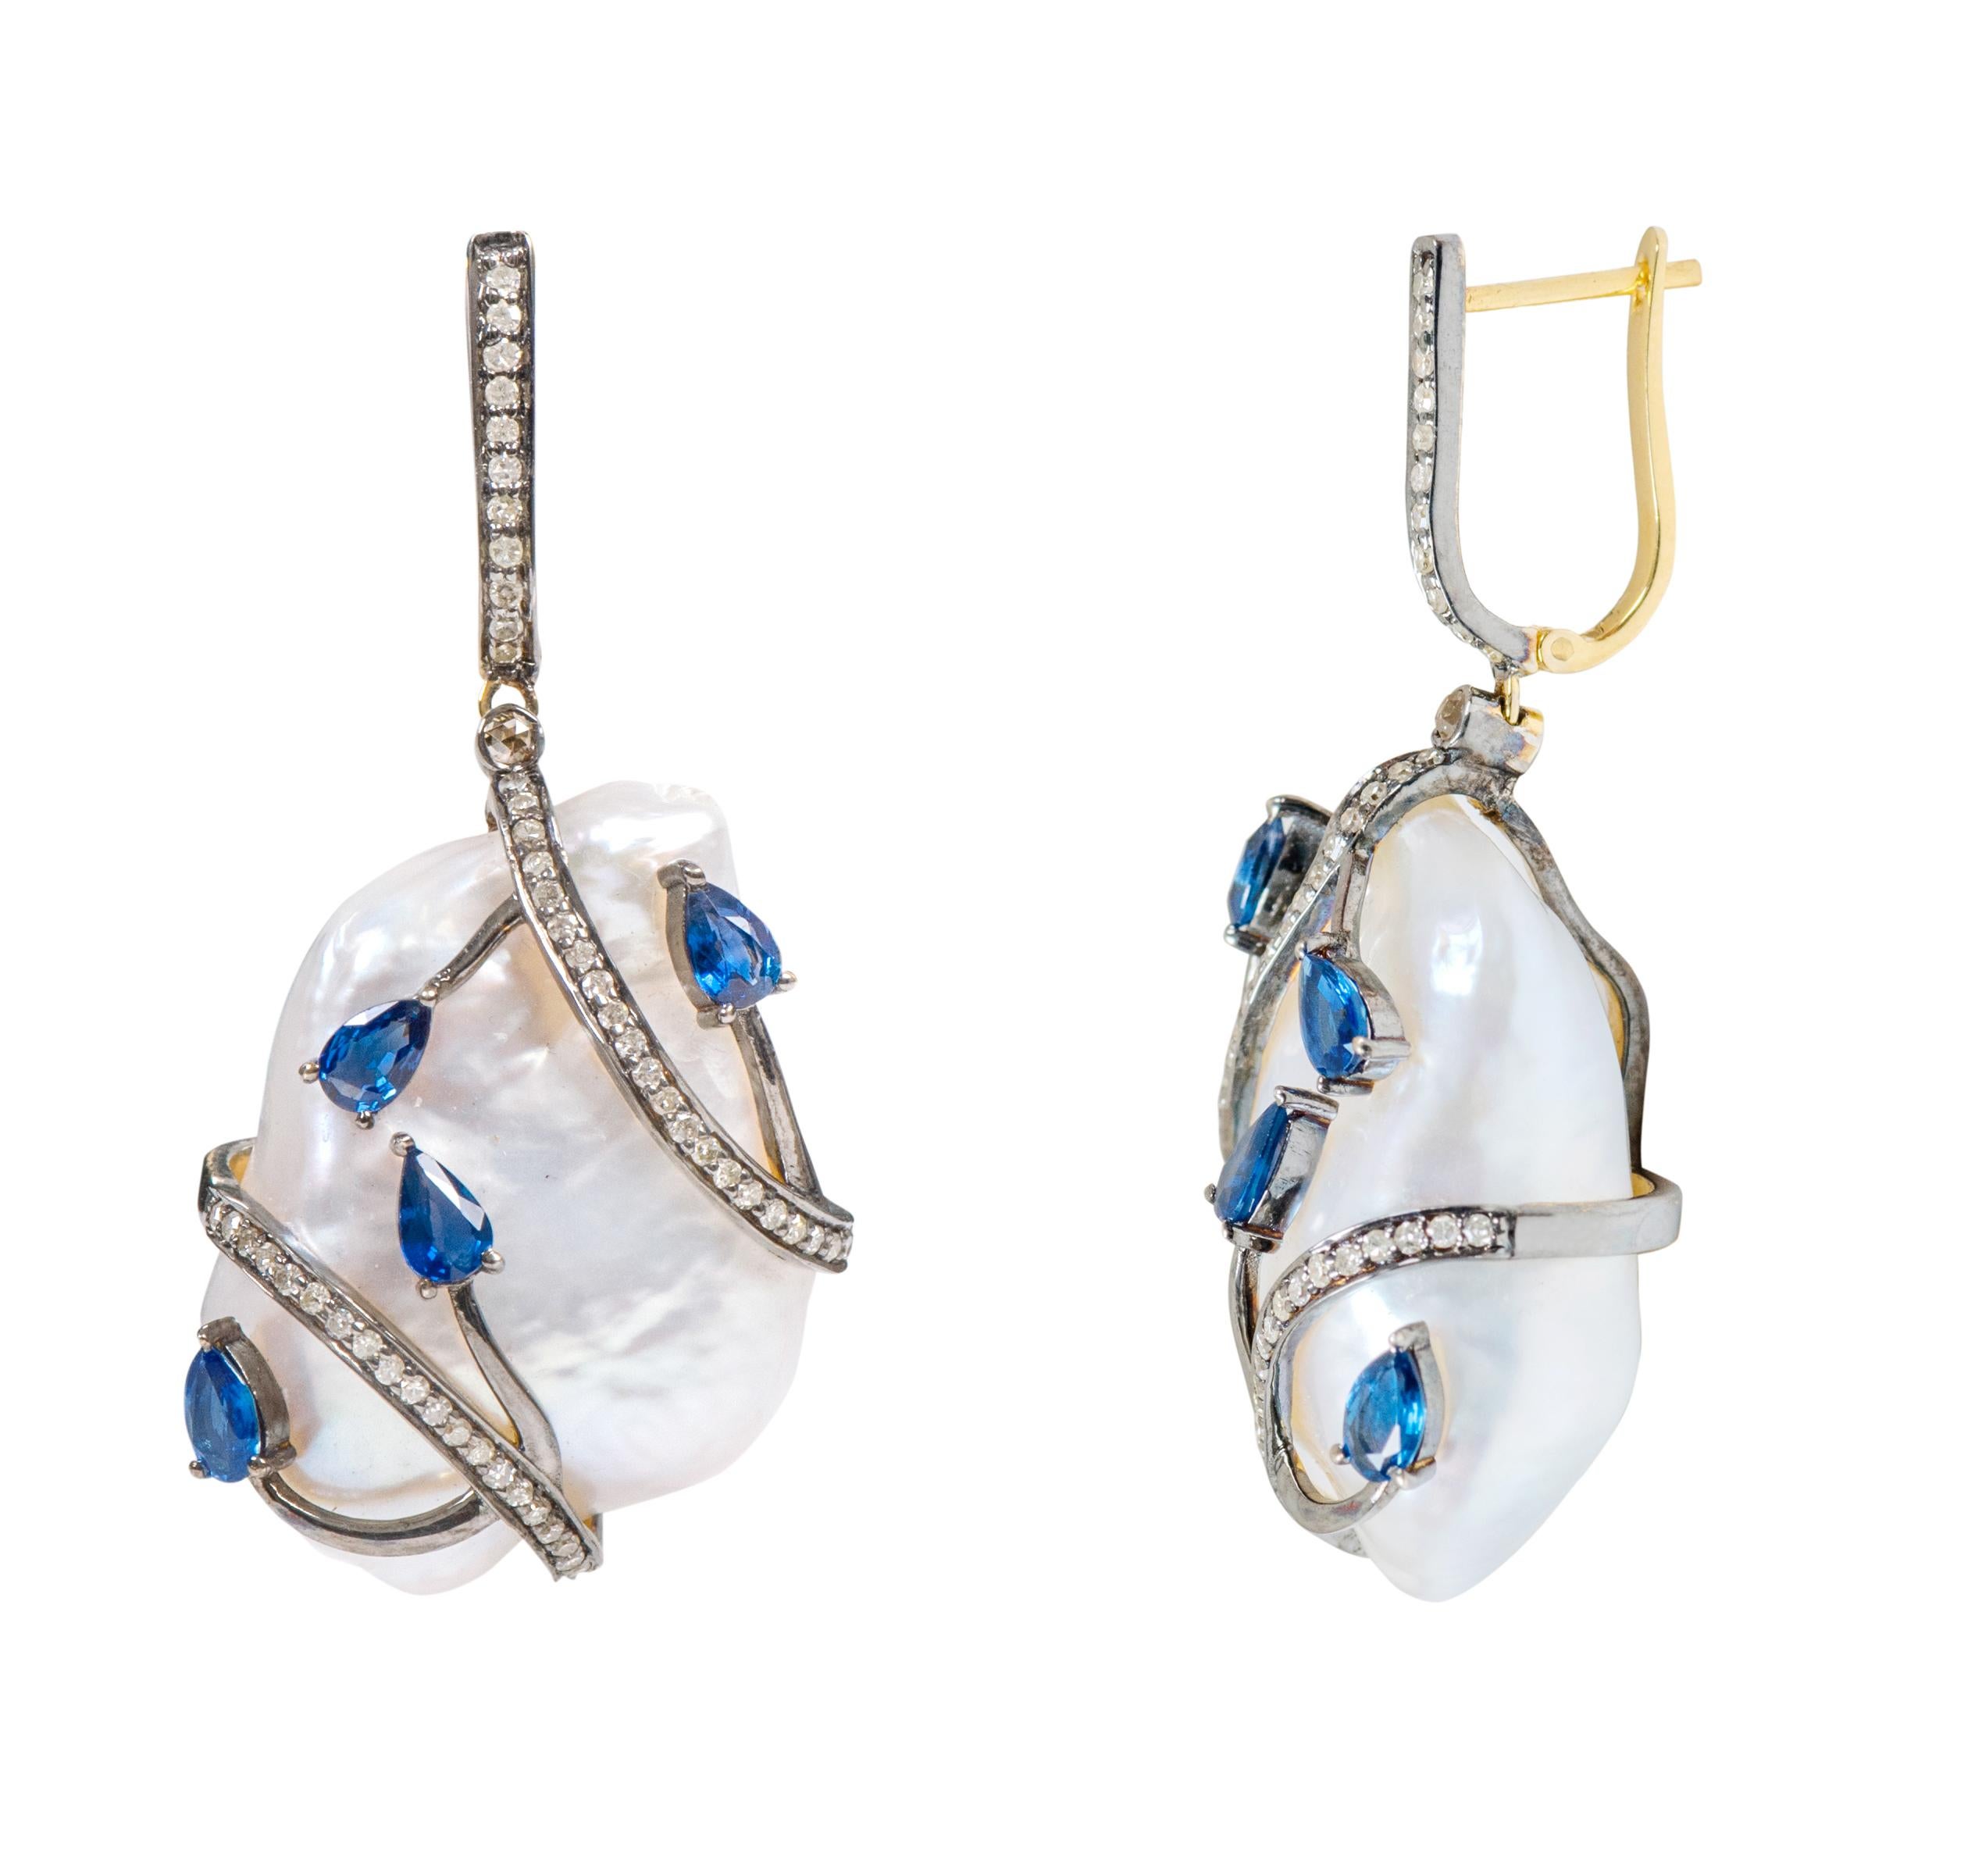 96.44 Carat Baroque Pearl, Sapphire, and Diamond Drop Earrings in Art Deco Style

This Victorian period art-deco style magnificent baroque pearl, sapphire and diamond earring is illustrious. The solitaire uneven uniquely shaped baroque translucent